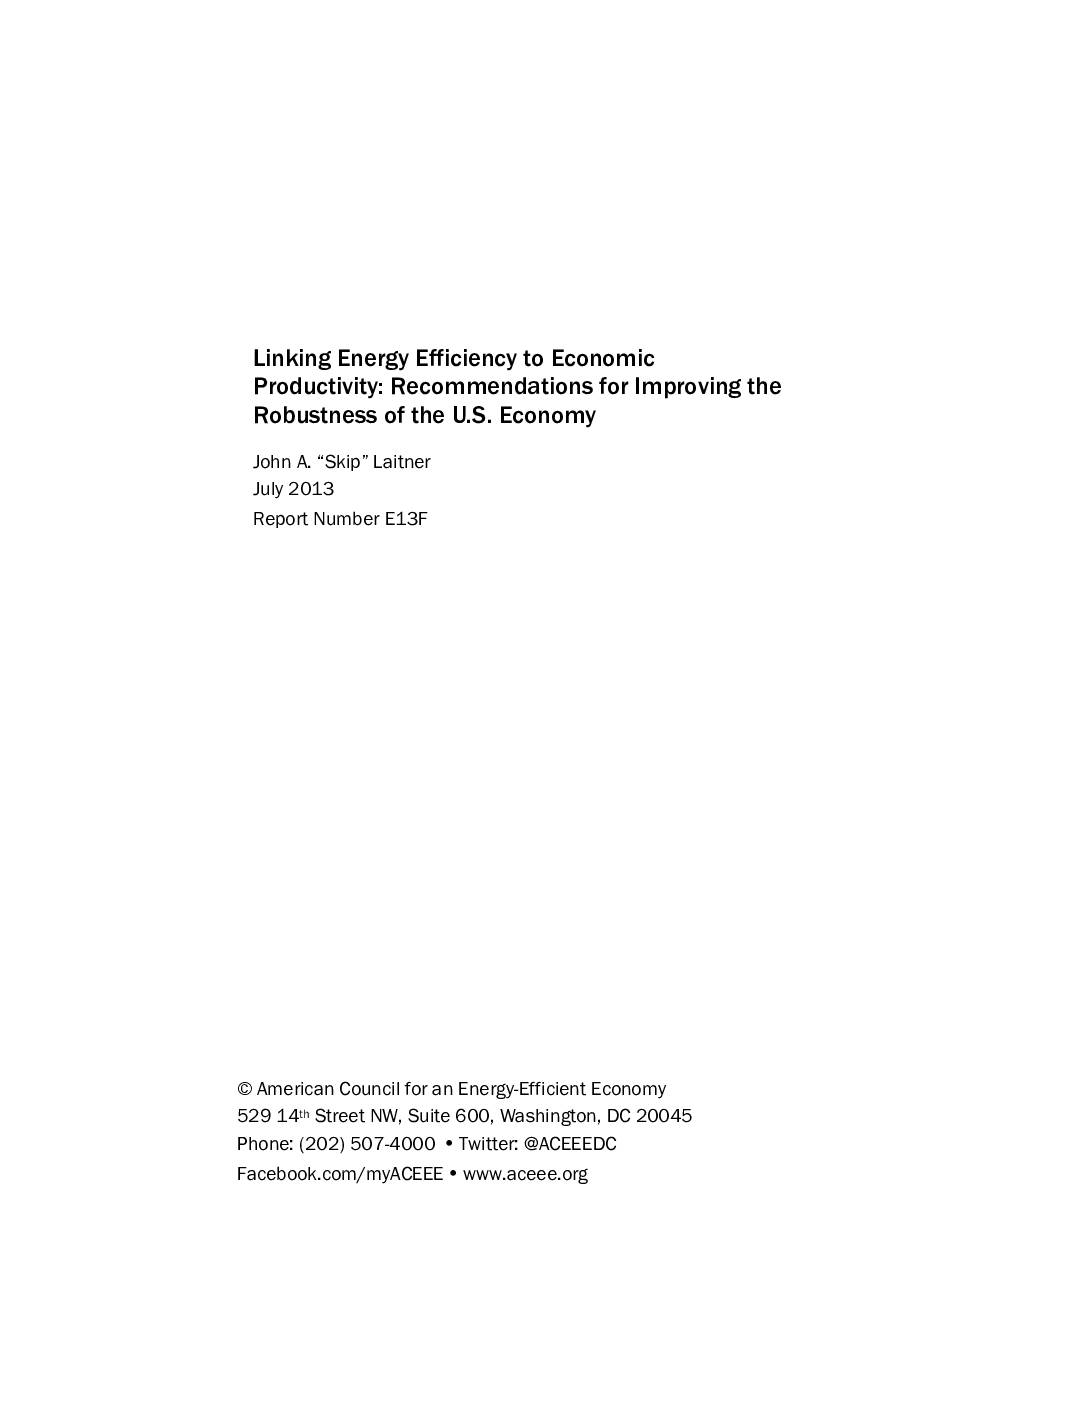 Linking Energy Efficiency to Economic Productivity: Recommendations for Improving the Robustness of the U.S. Economy